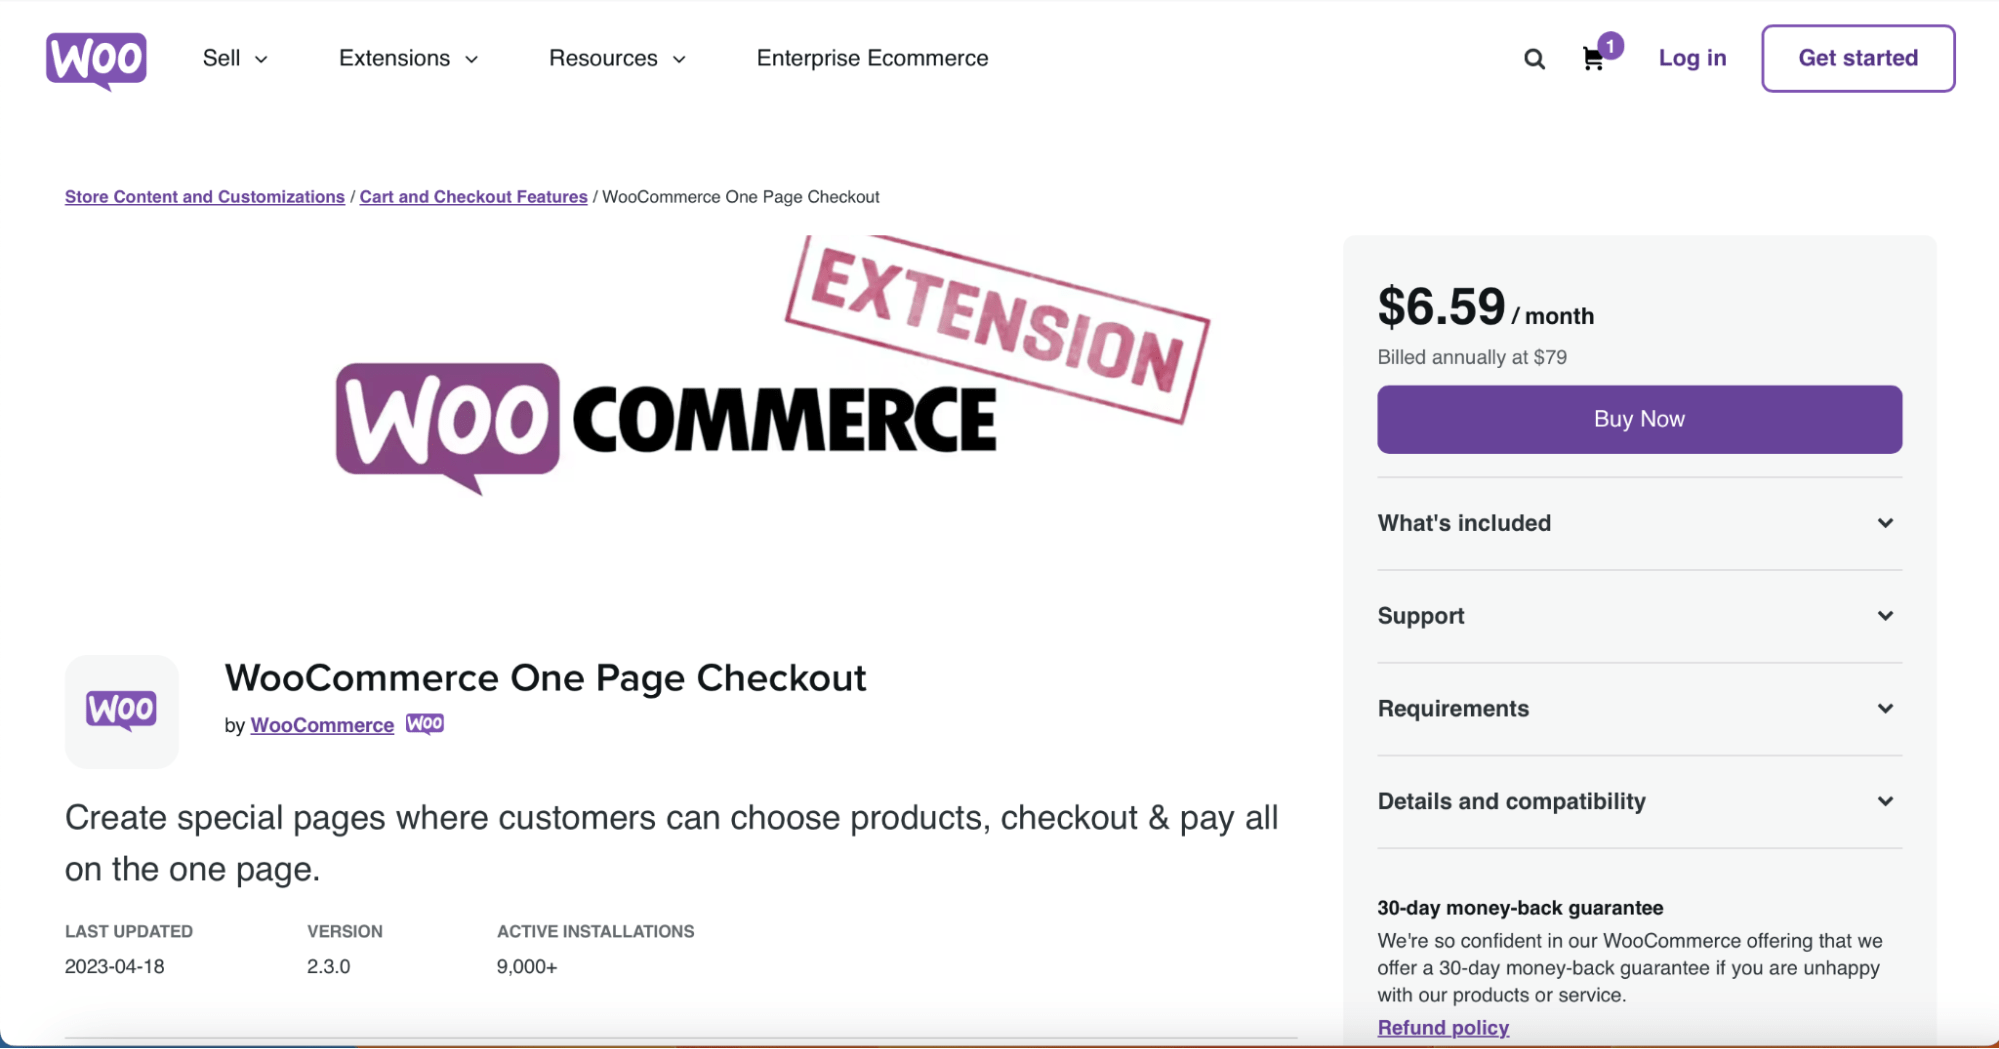 WooCommerce One Page Checkout homepage